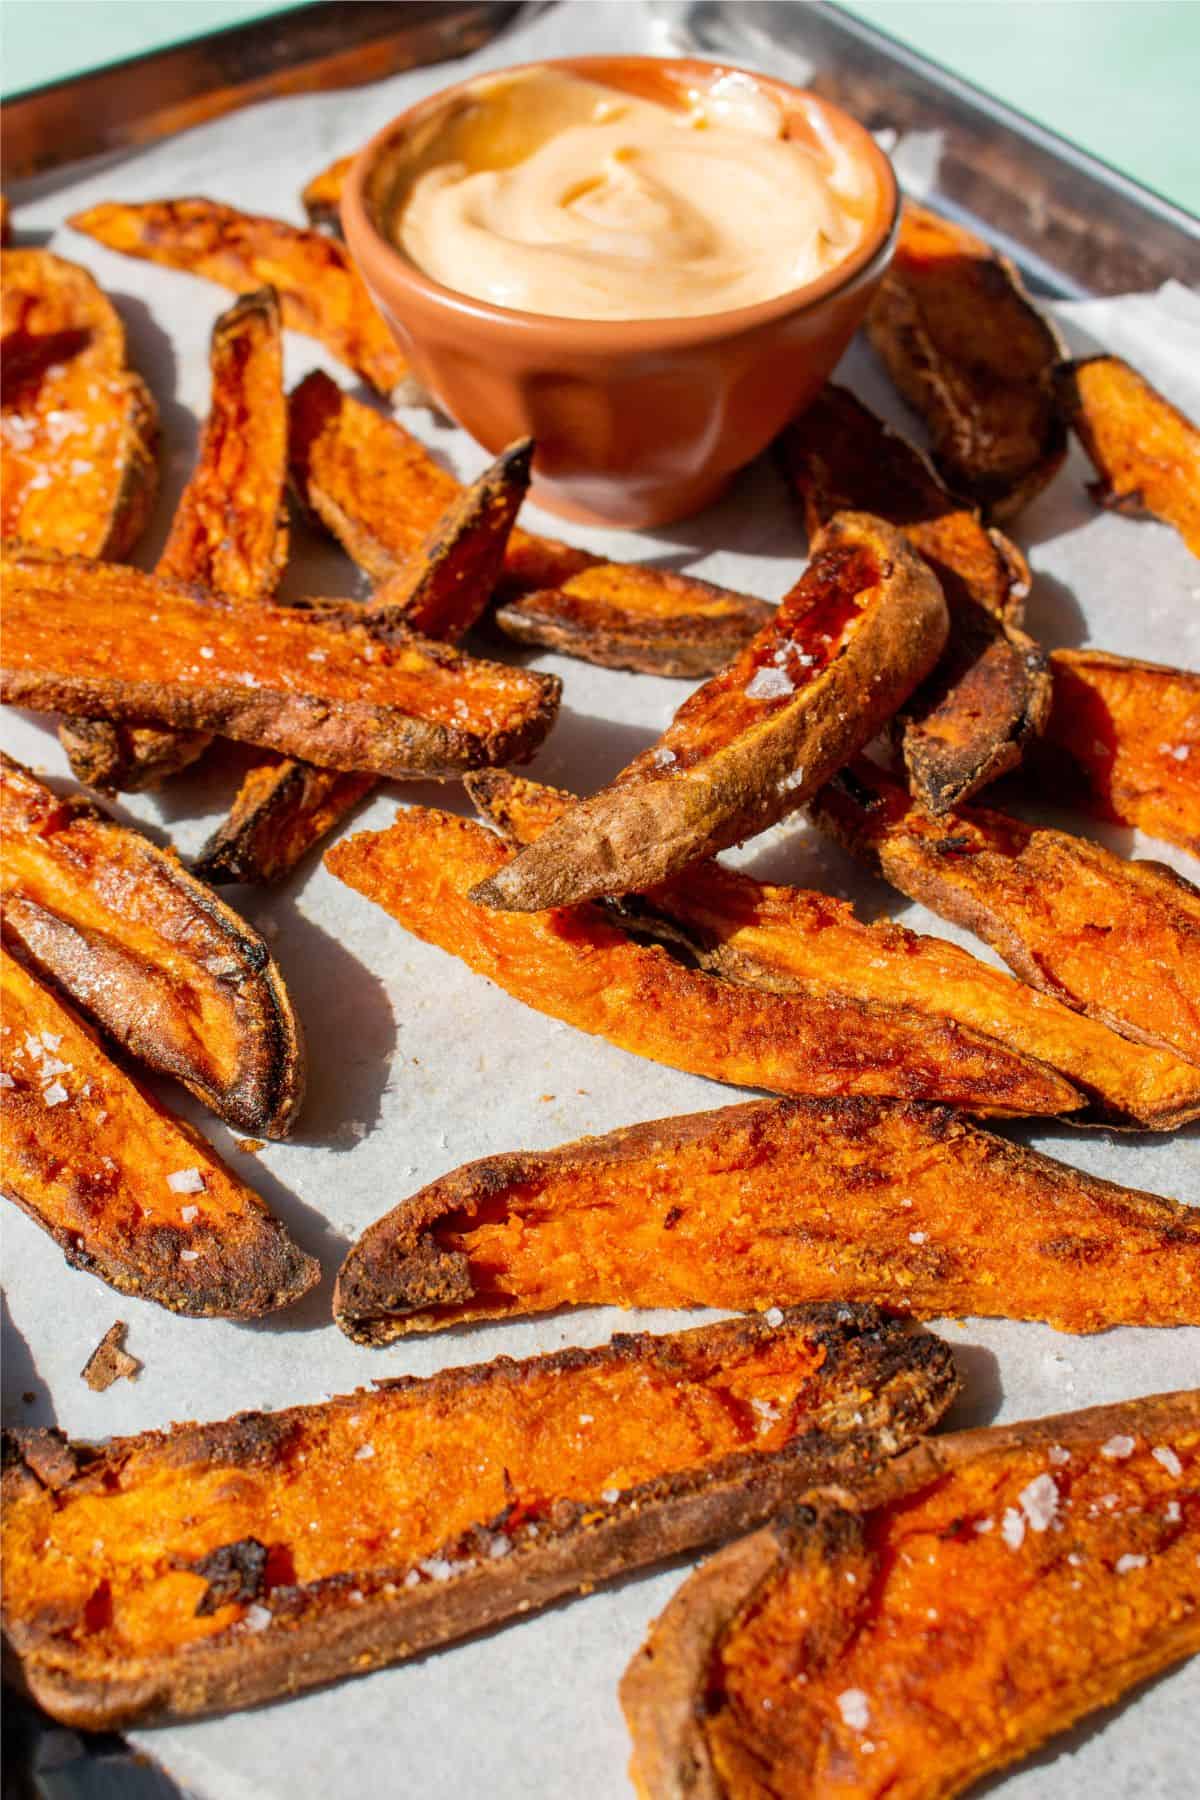 Side view of baked sweet potatoes fries on a baking tray with parchment paper and dipping sauce.